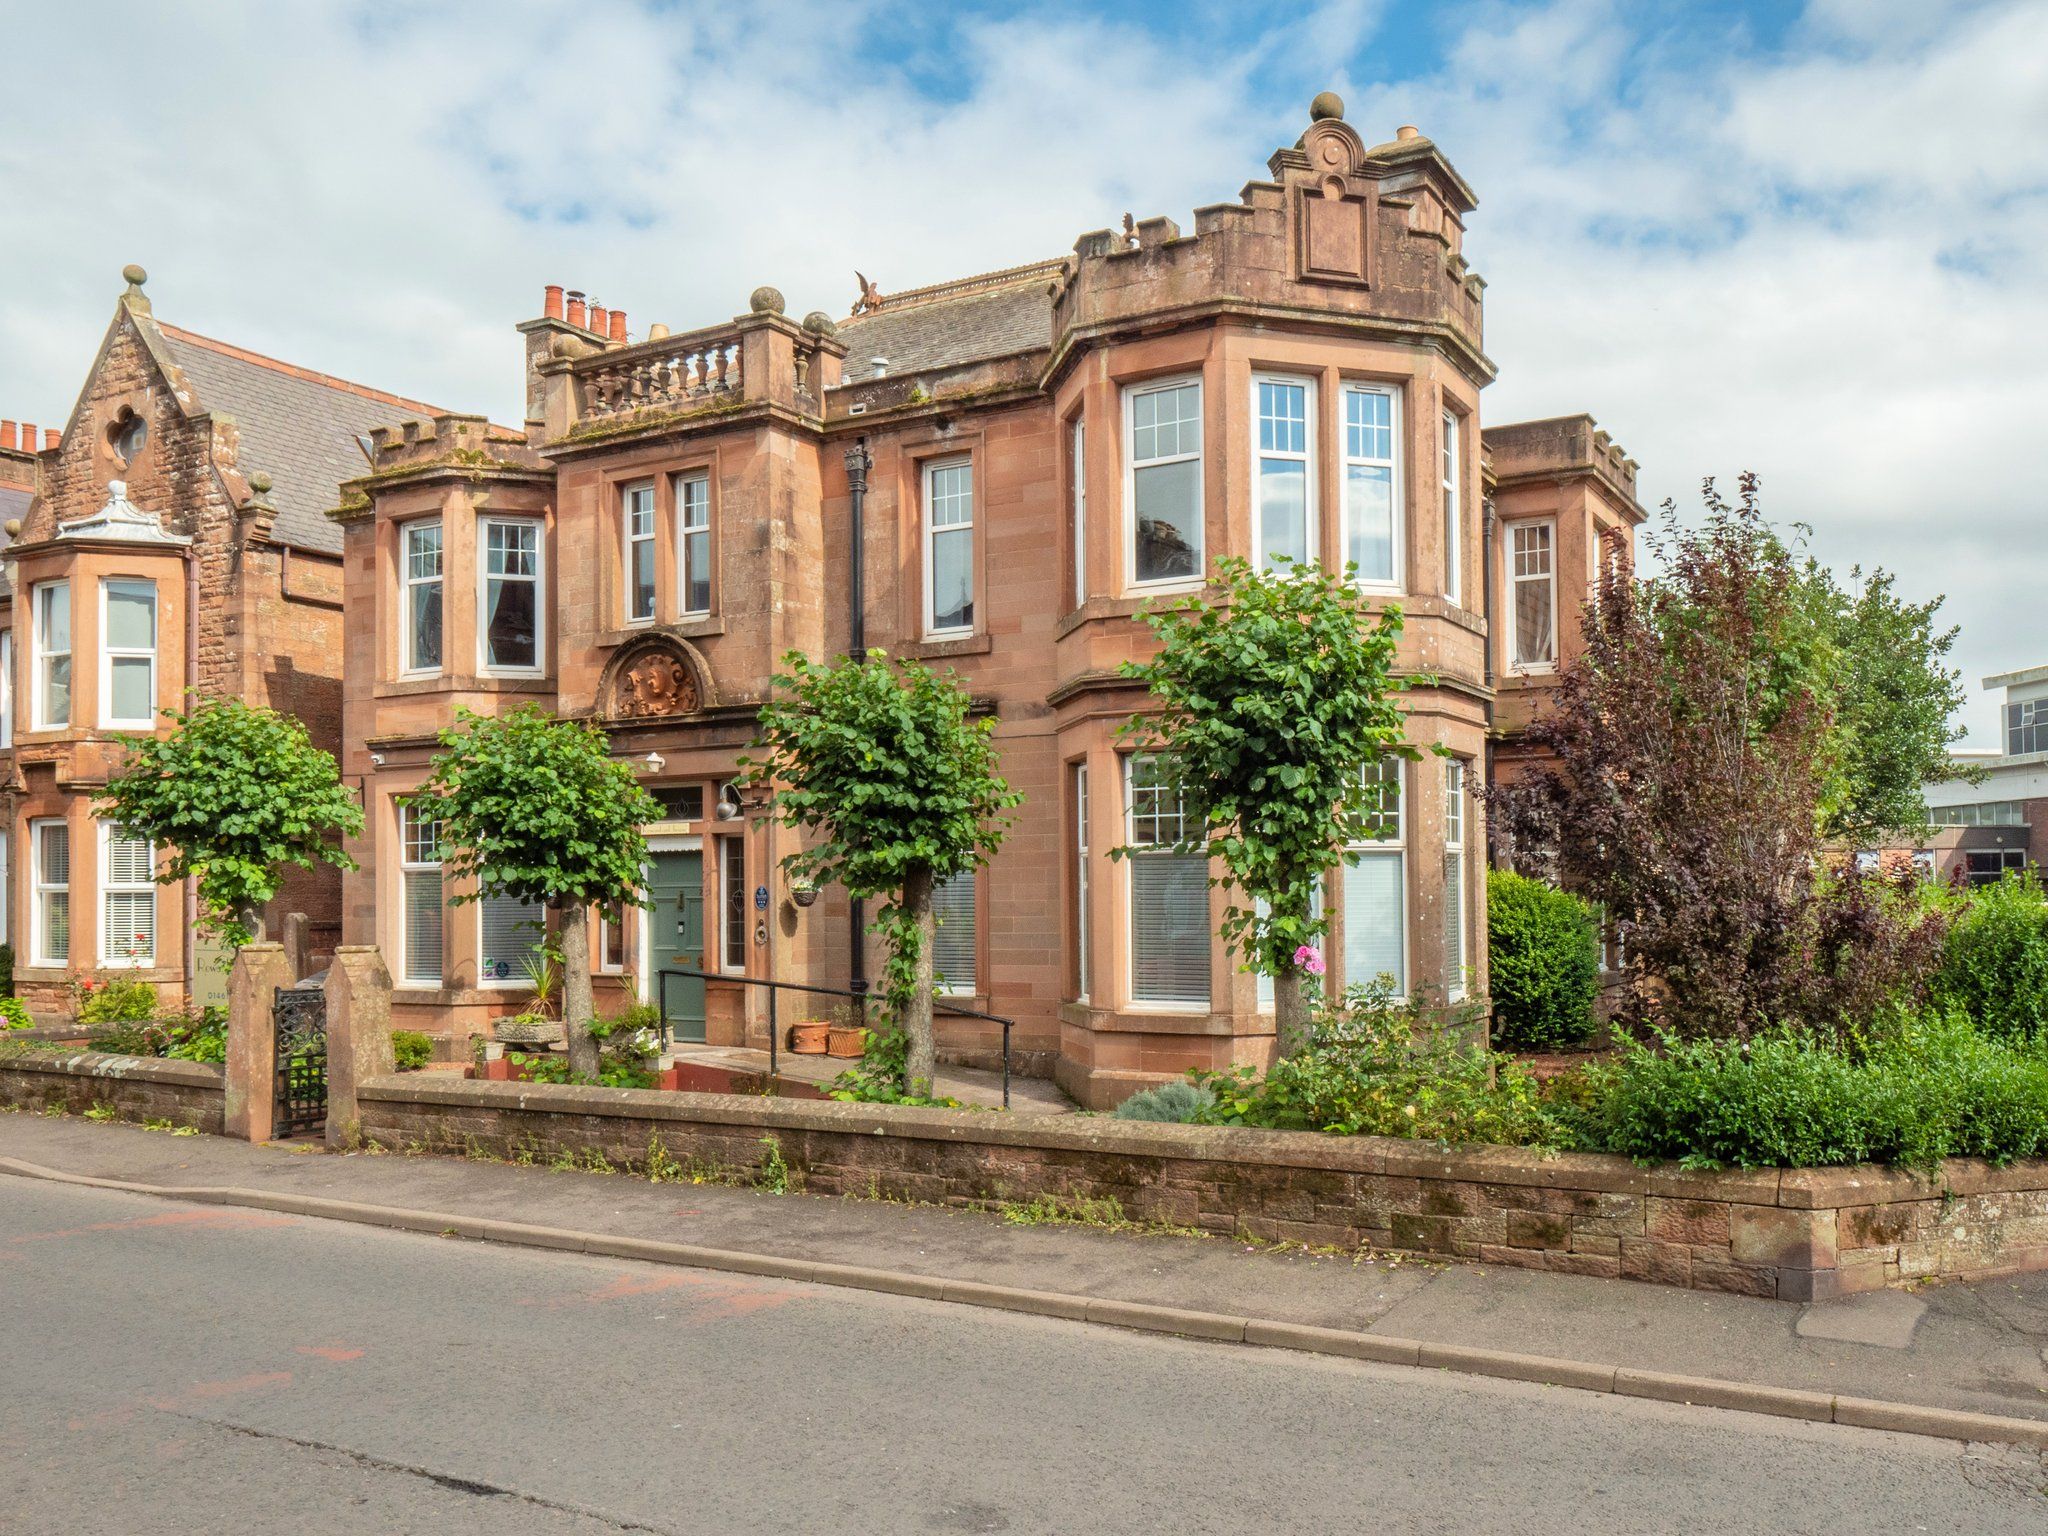 St Johns Road , Annan, Dumfries and Galloway, DG12 6AW